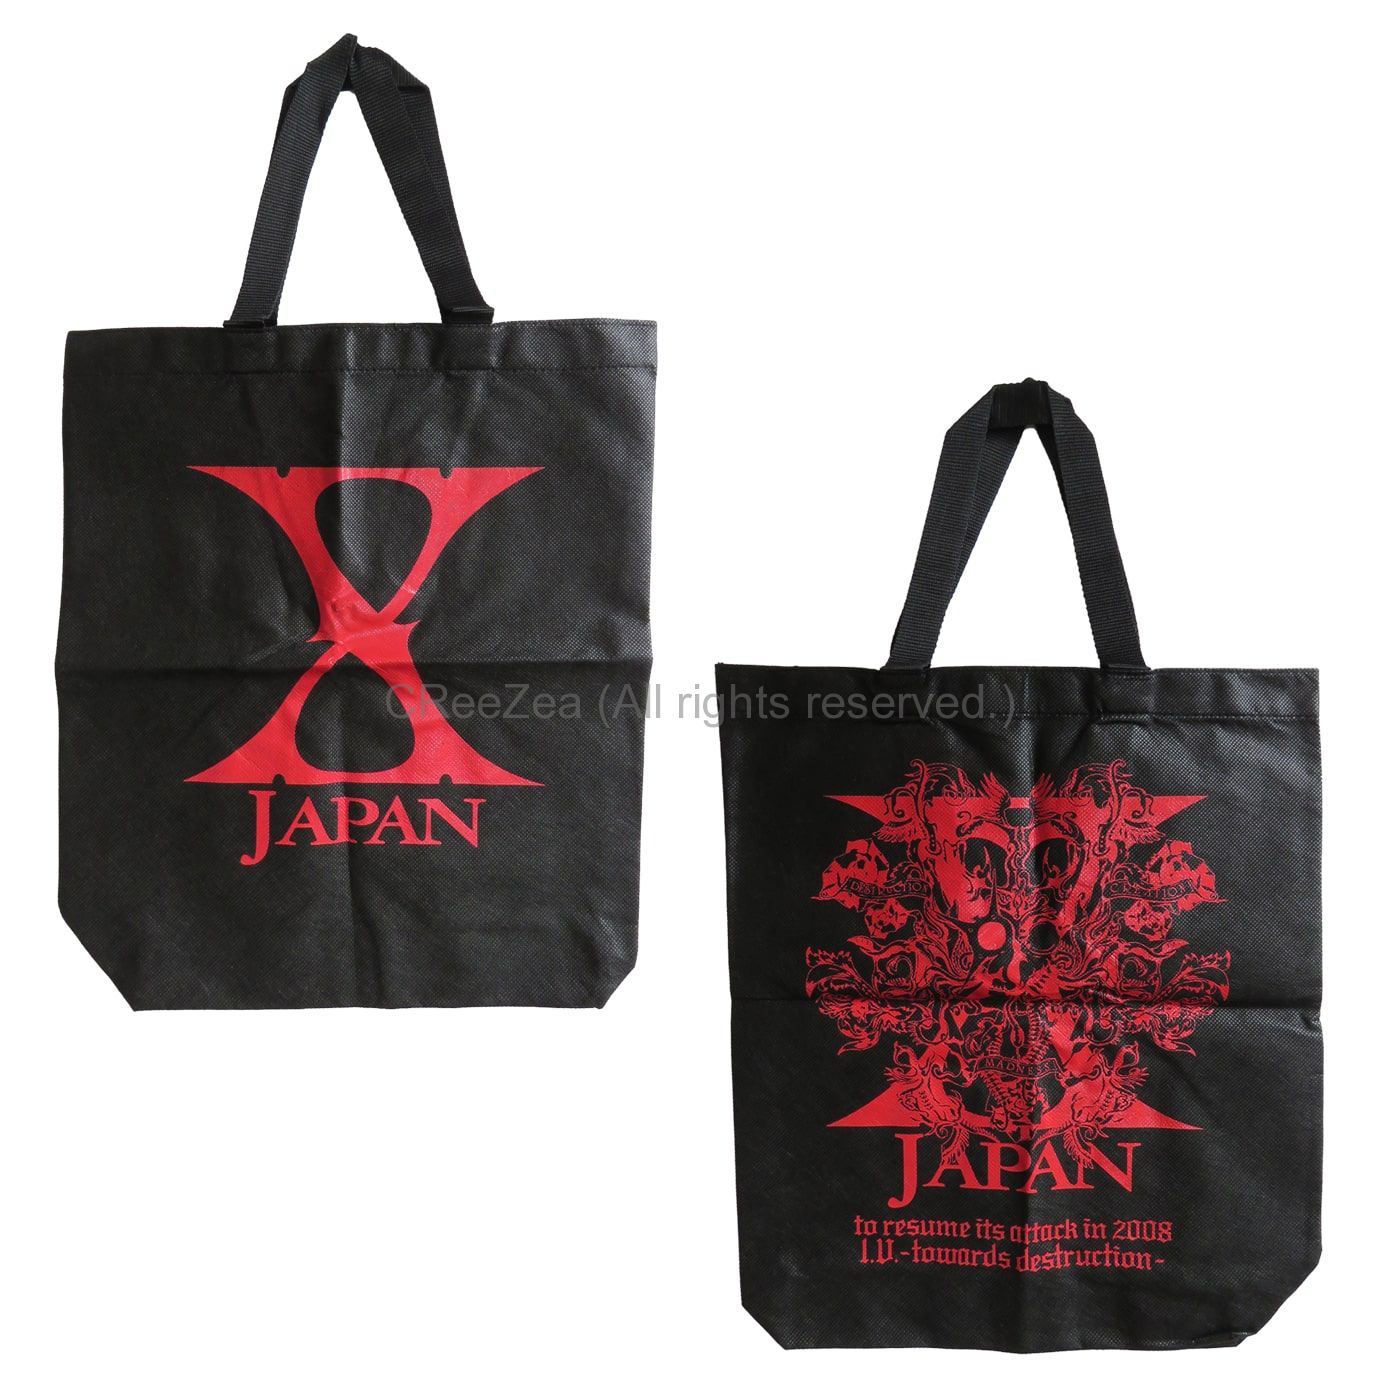 XJAPAN トートバッグ グッズ 限定品-